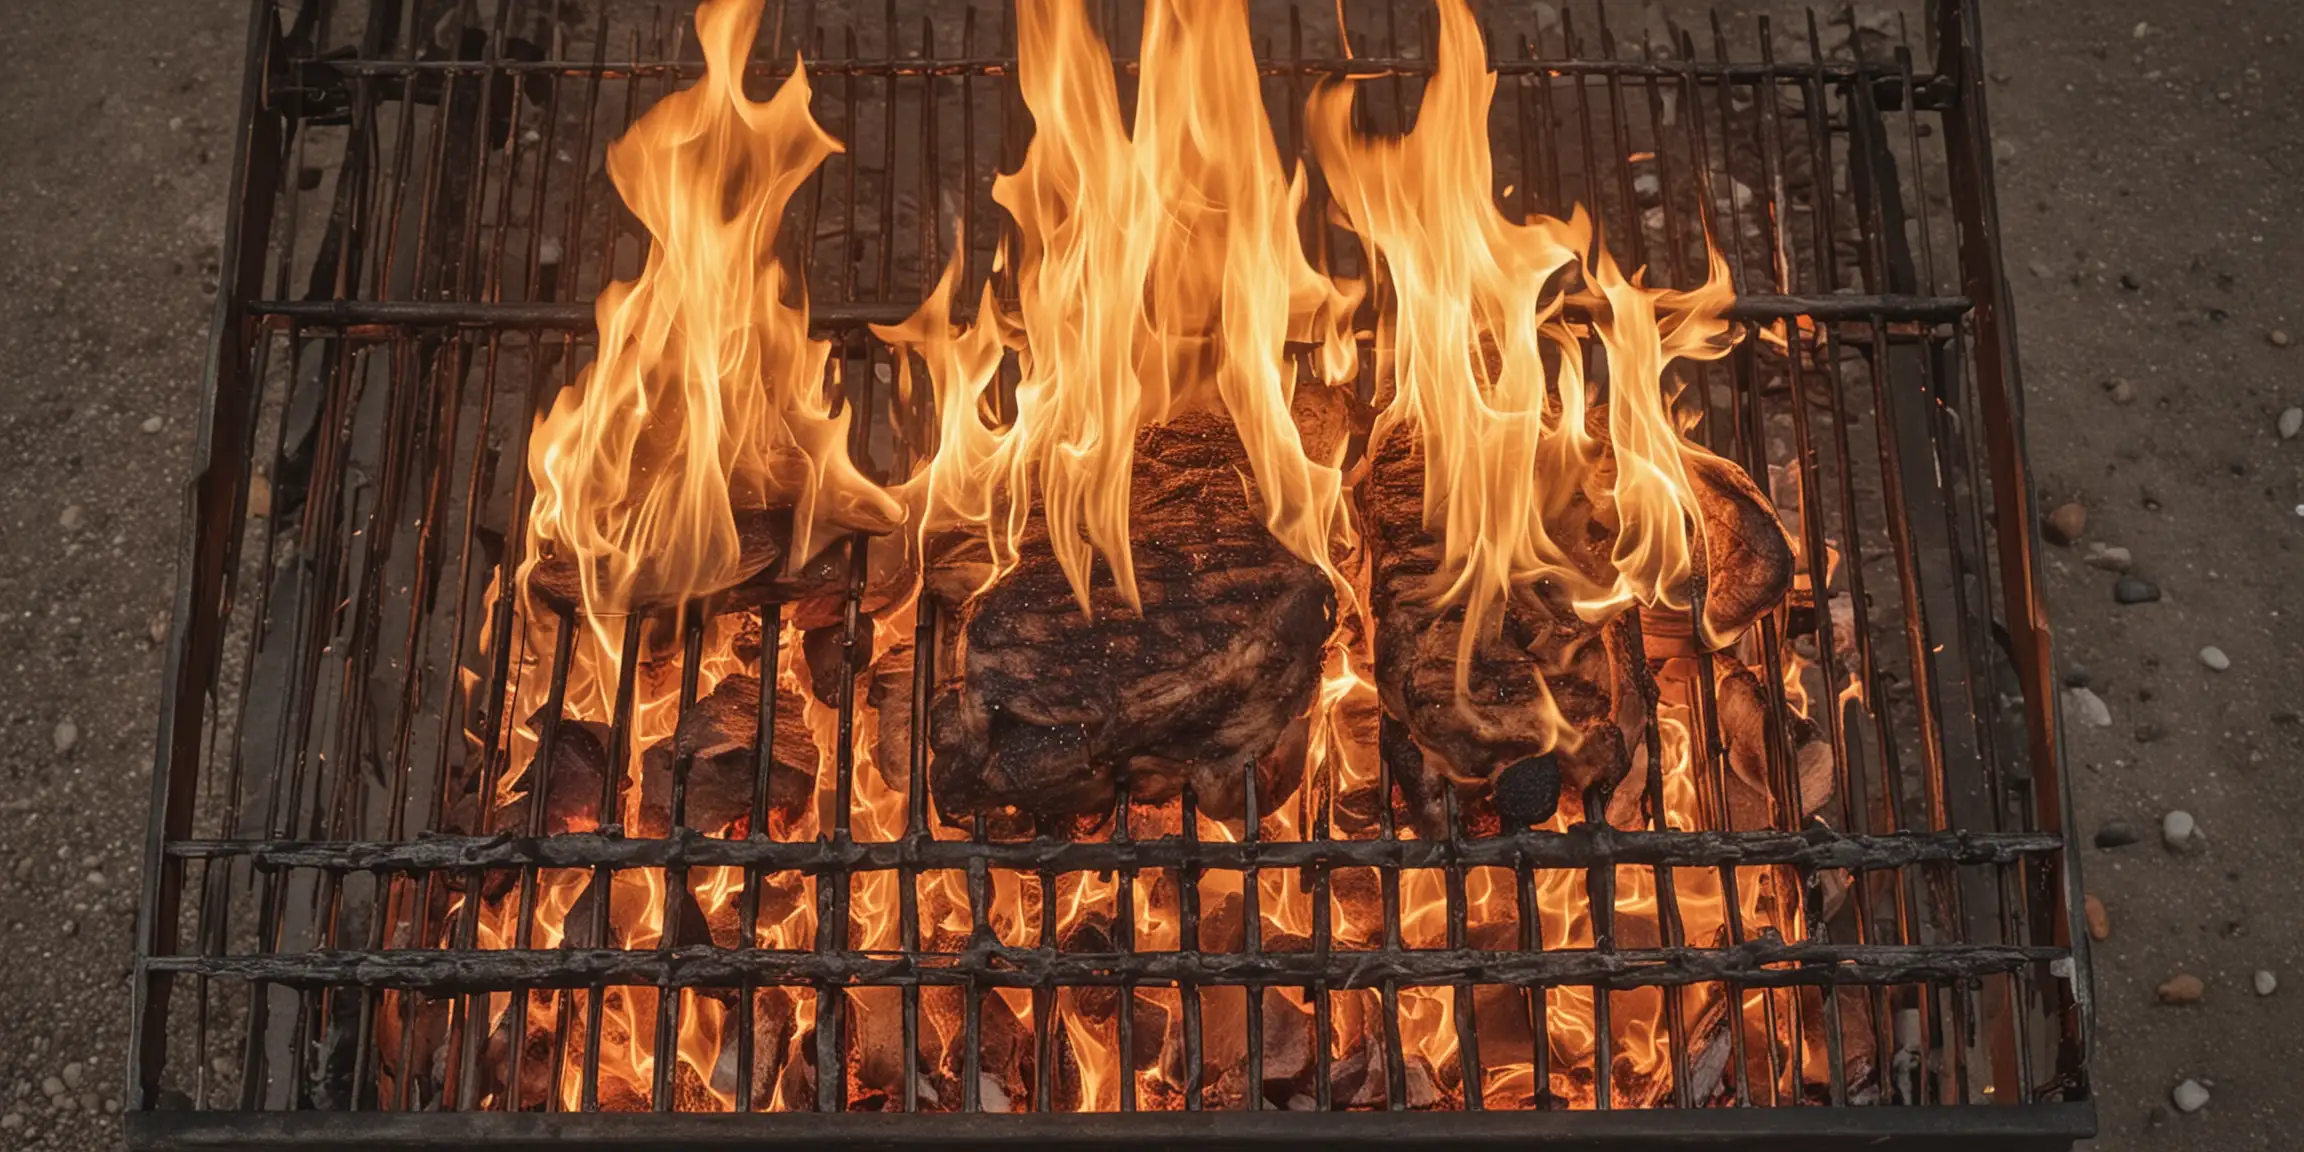 View from above, flames engulfing a barbecue grill.